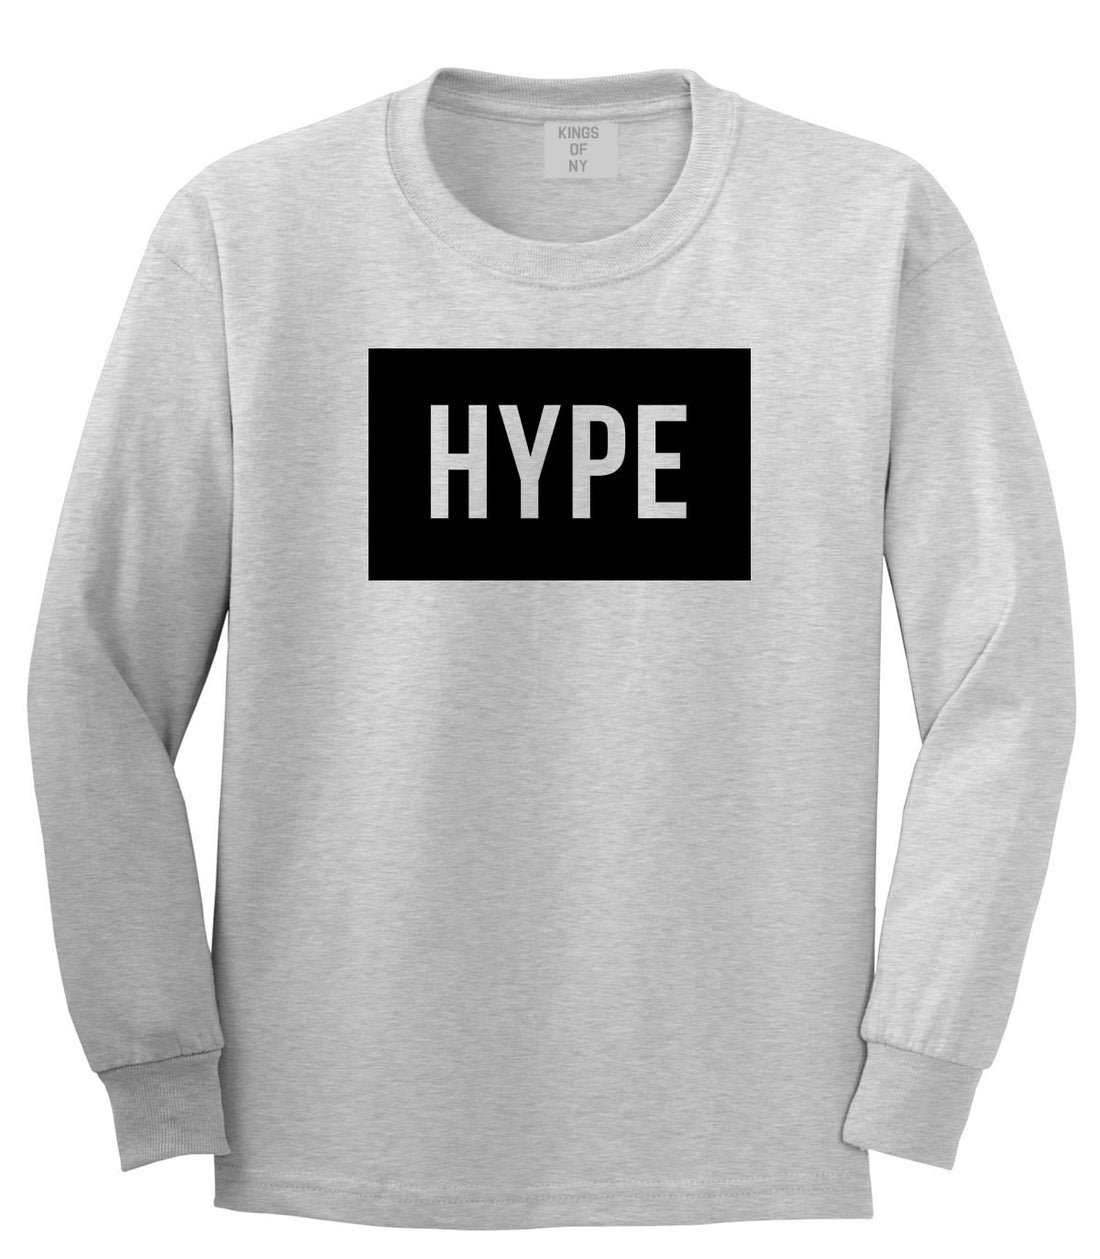 Hype Style Streetwear Brand Logo White by Kings Of NY Long Sleeve Boys Kids T-Shirt In Grey by Kings Of NY